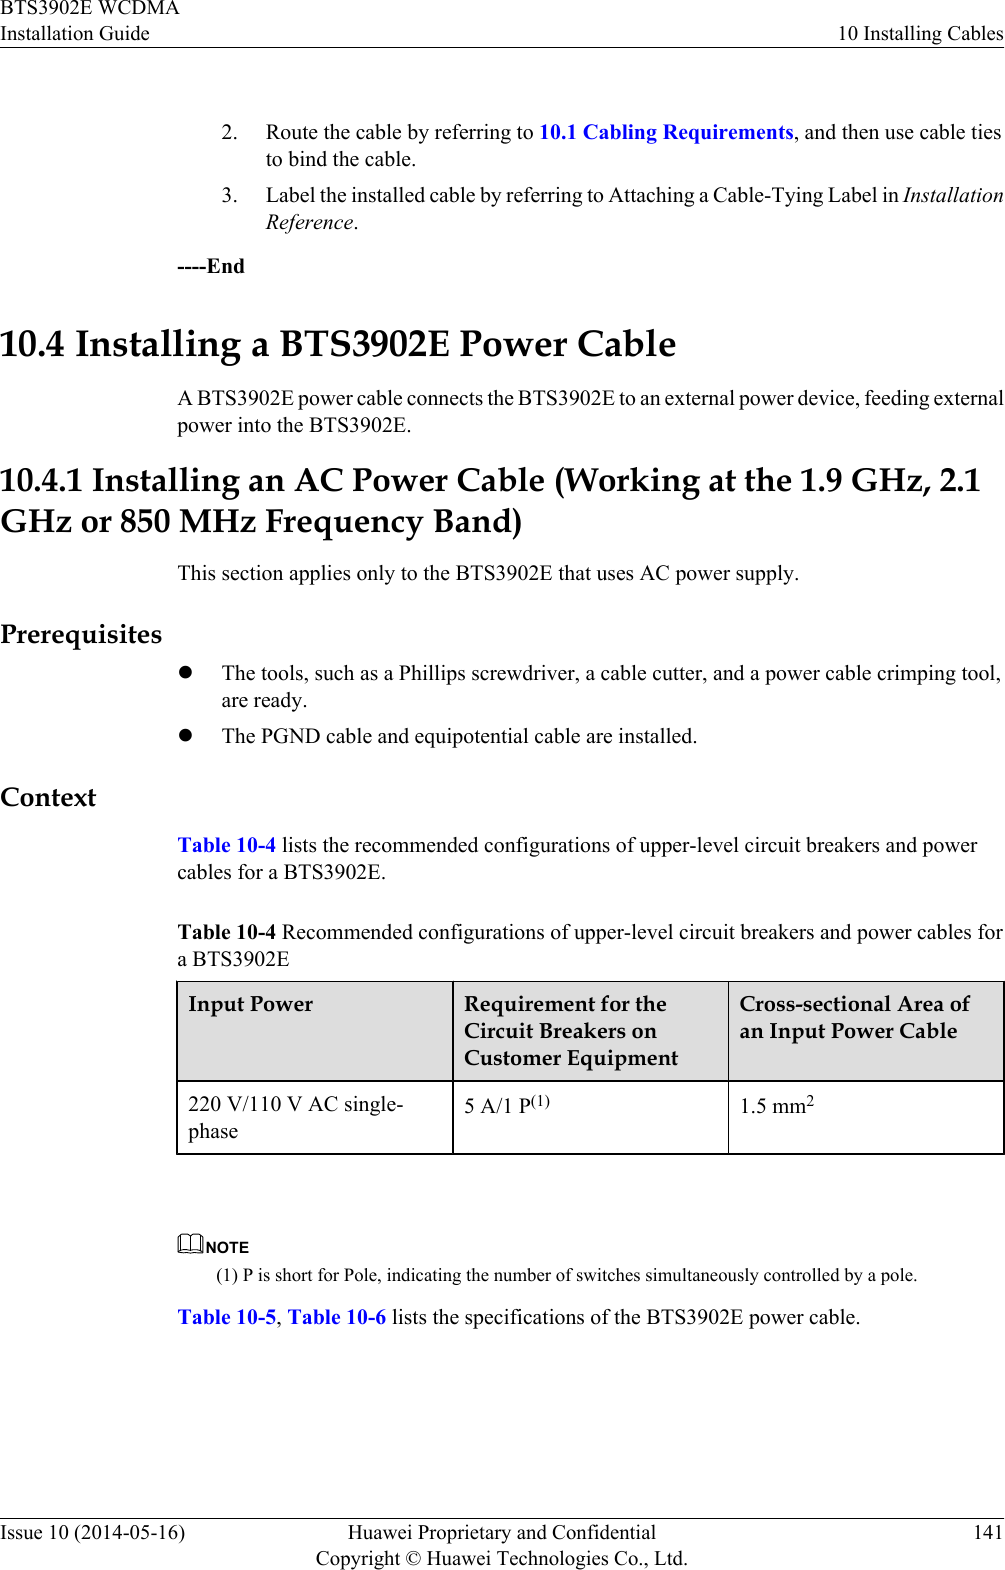  2. Route the cable by referring to 10.1 Cabling Requirements, and then use cable tiesto bind the cable.3. Label the installed cable by referring to Attaching a Cable-Tying Label in InstallationReference.----End10.4 Installing a BTS3902E Power CableA BTS3902E power cable connects the BTS3902E to an external power device, feeding externalpower into the BTS3902E.10.4.1 Installing an AC Power Cable (Working at the 1.9 GHz, 2.1GHz or 850 MHz Frequency Band)This section applies only to the BTS3902E that uses AC power supply.PrerequisiteslThe tools, such as a Phillips screwdriver, a cable cutter, and a power cable crimping tool,are ready.lThe PGND cable and equipotential cable are installed.ContextTable 10-4 lists the recommended configurations of upper-level circuit breakers and powercables for a BTS3902E.Table 10-4 Recommended configurations of upper-level circuit breakers and power cables fora BTS3902EInput Power Requirement for theCircuit Breakers onCustomer EquipmentCross-sectional Area ofan Input Power Cable220 V/110 V AC single-phase5 A/1 P(1) 1.5 mm2 NOTE(1) P is short for Pole, indicating the number of switches simultaneously controlled by a pole.Table 10-5, Table 10-6 lists the specifications of the BTS3902E power cable.BTS3902E WCDMAInstallation Guide 10 Installing CablesIssue 10 (2014-05-16) Huawei Proprietary and ConfidentialCopyright © Huawei Technologies Co., Ltd.141